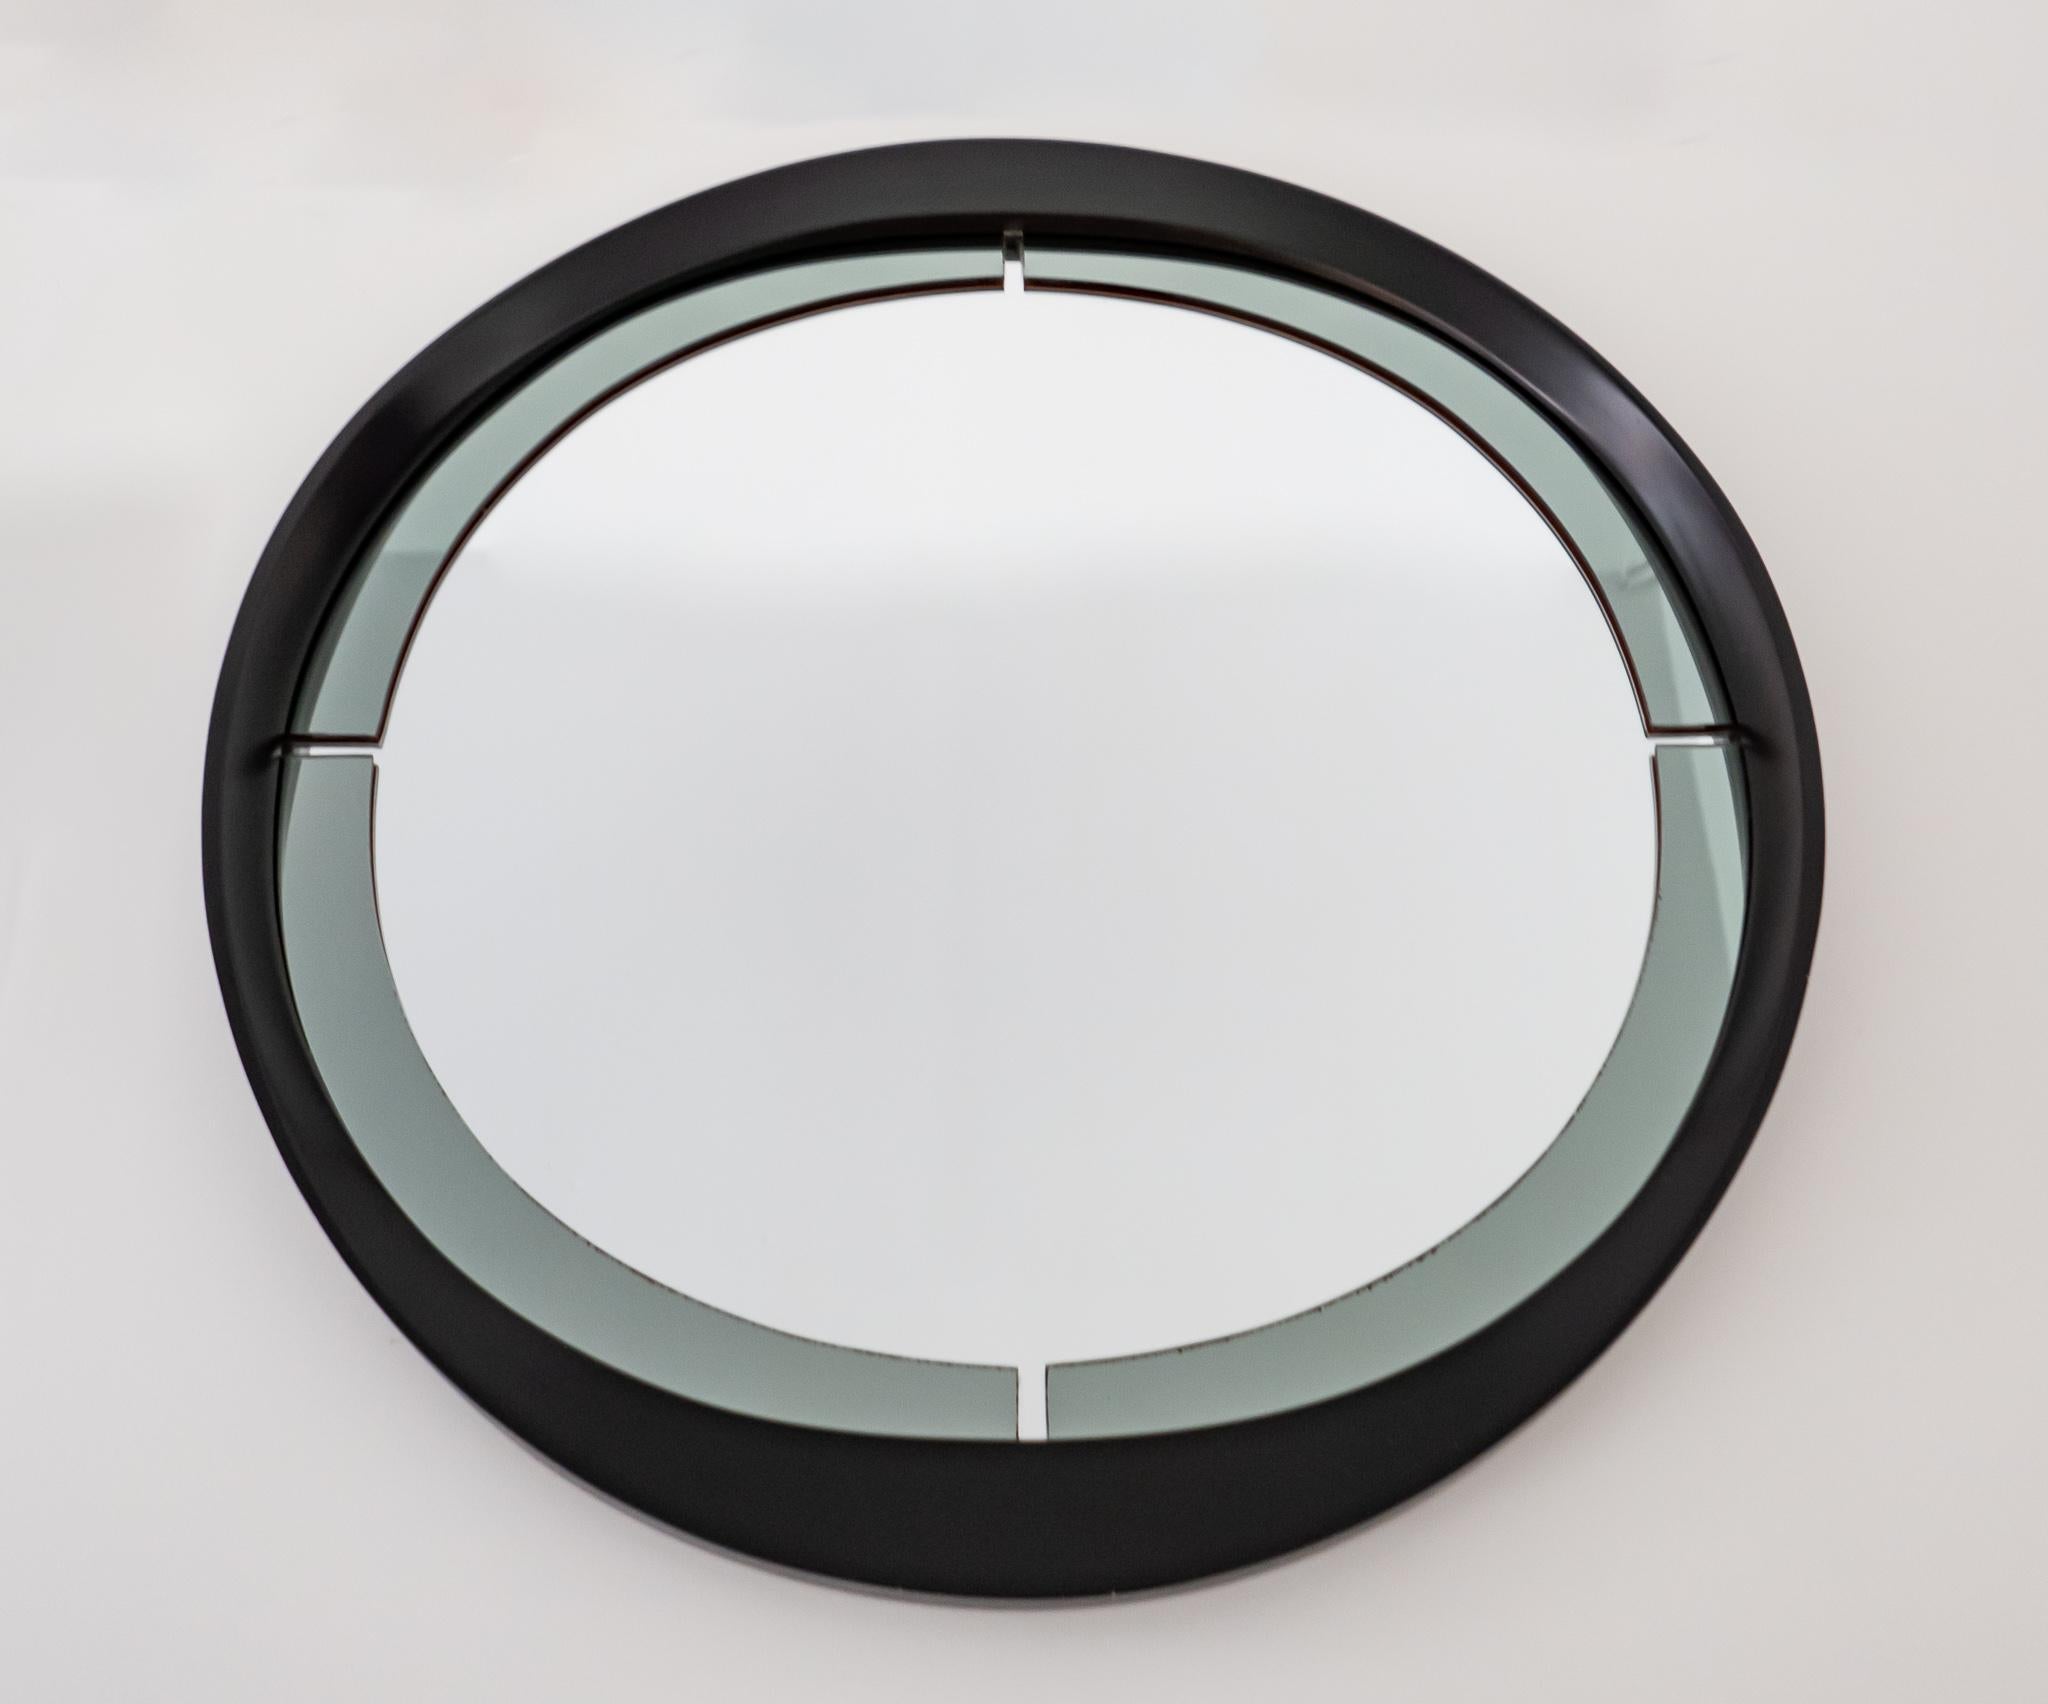 Mid-Century Modern round wooden smoked glass wall mirror, Italy 1970s.

An elegant and rare large round Italian wall mirror made of a two-layered glass. The layer of the mirror frame features grey smoked glass which has 4 cutouts on the left and